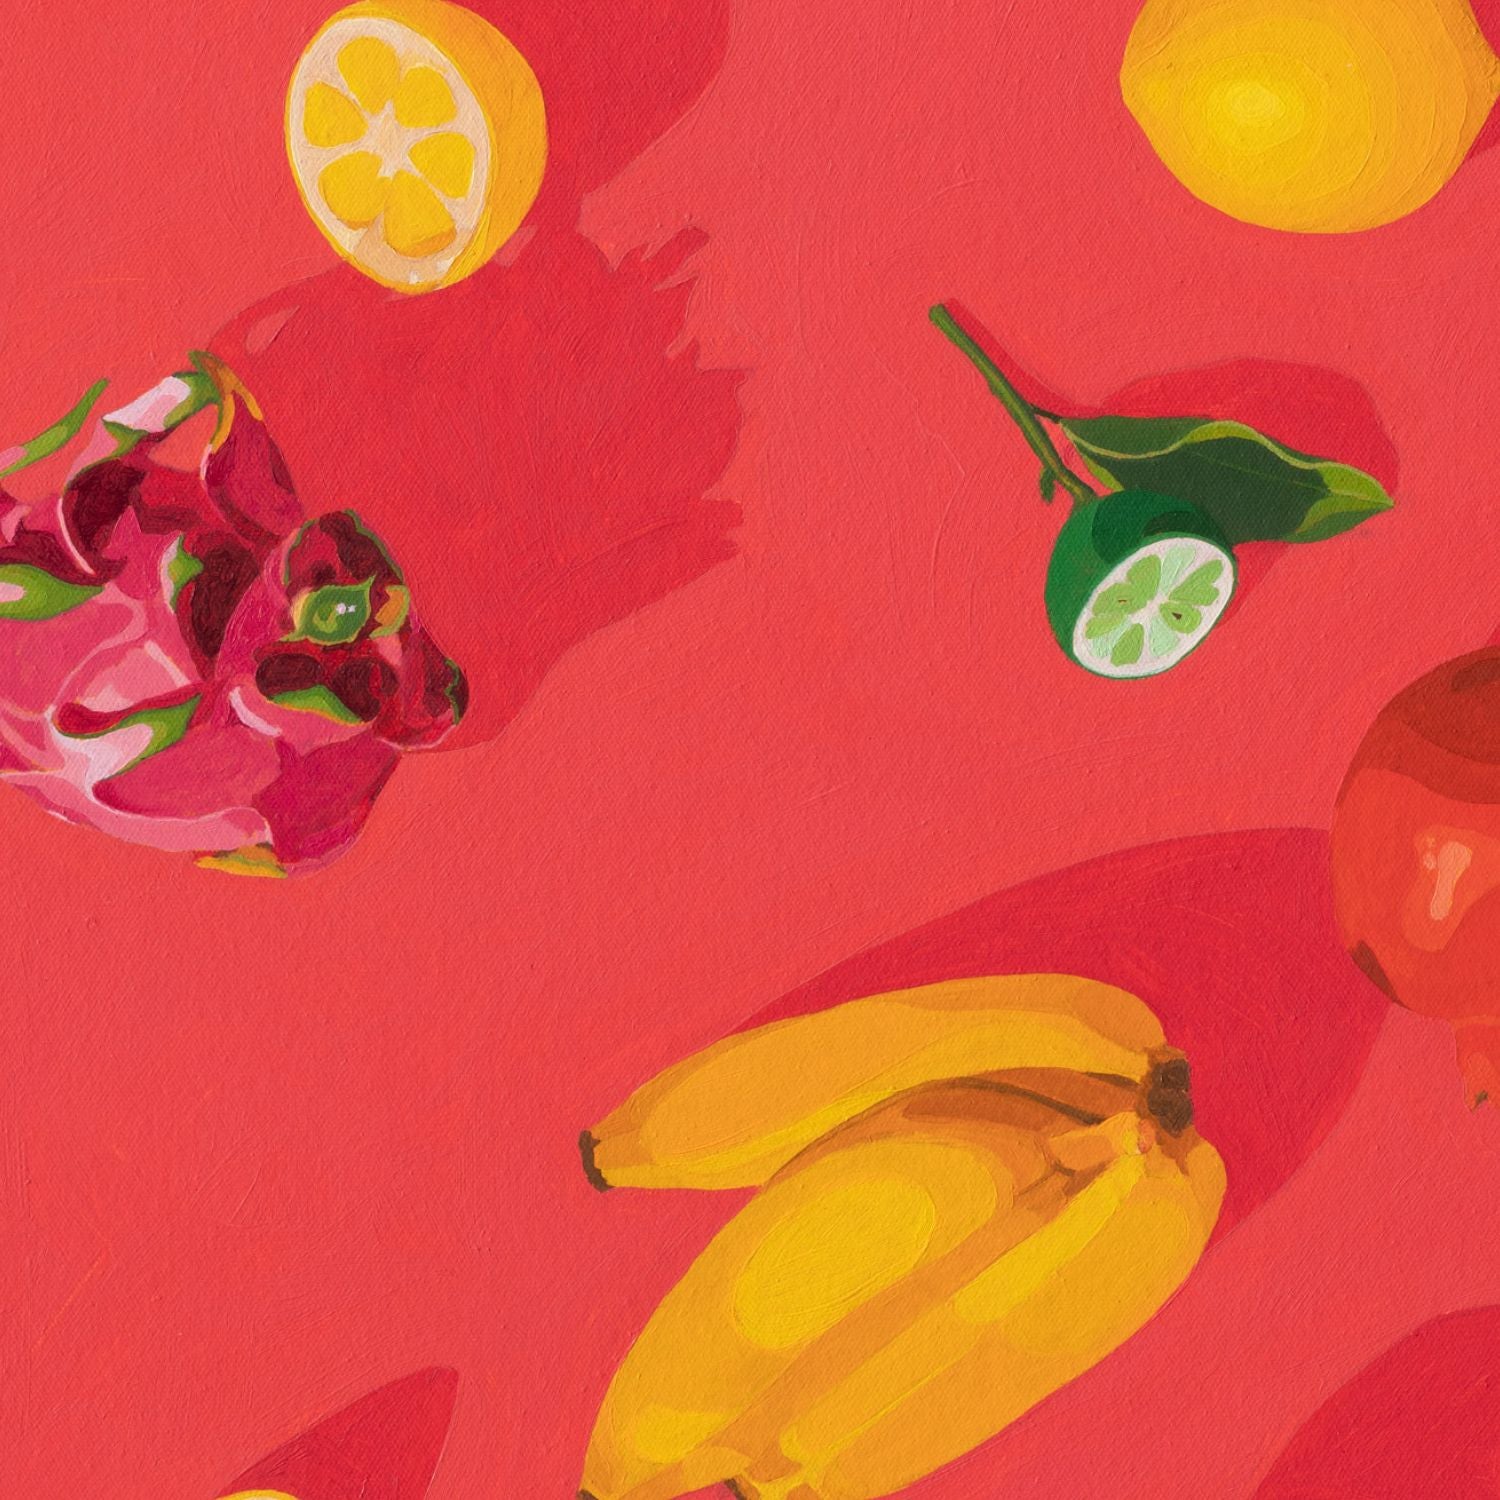 closeup of an original oil painting of fresh fruits like bananas, lemons, dragonfruit, pomegranate, lime and apricot on a vibrant and bright red background with beautiful shadows